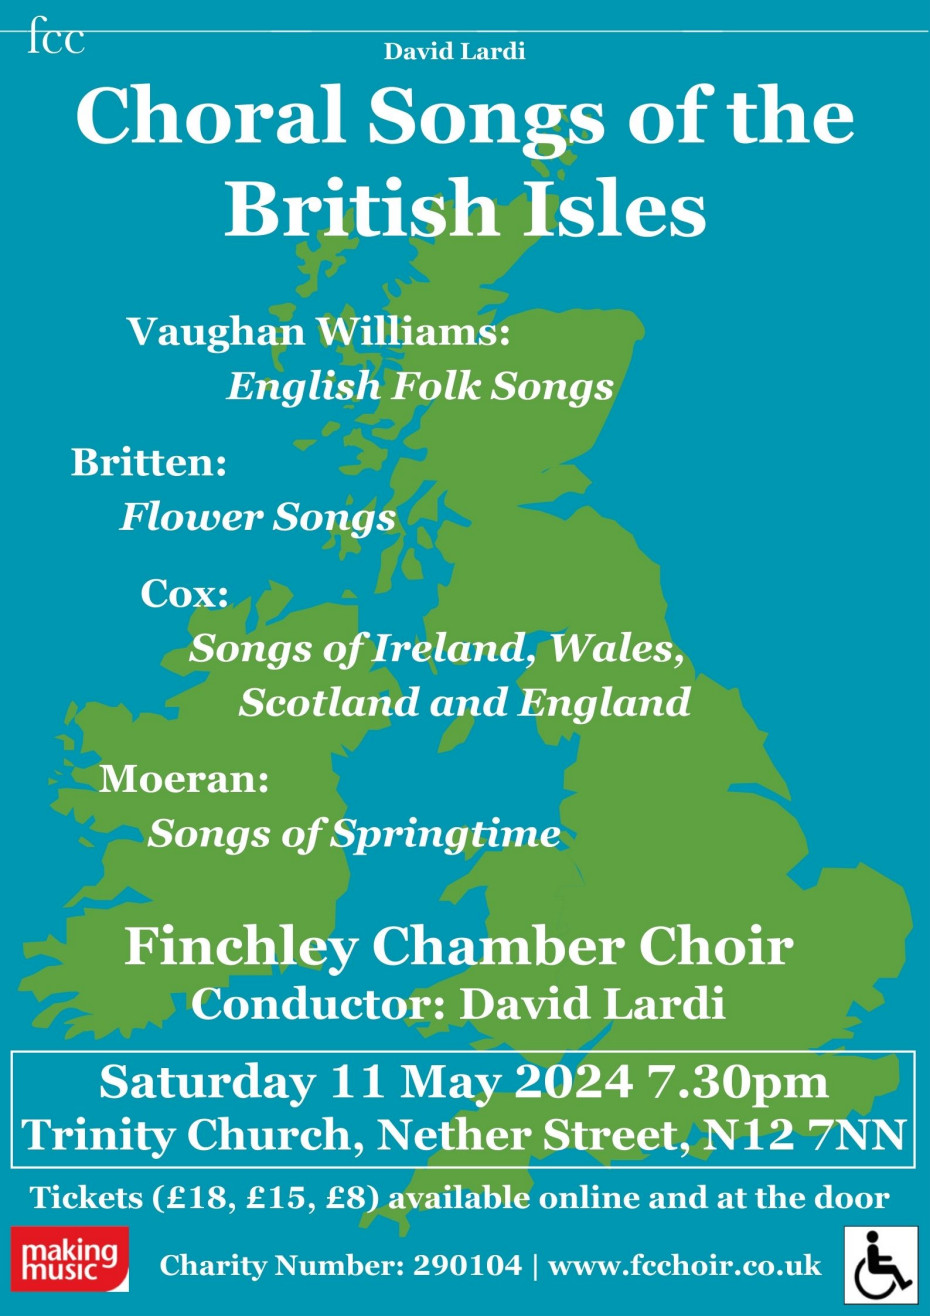 FCC concert, 11 May 2024: Choral Songs from the British Isles